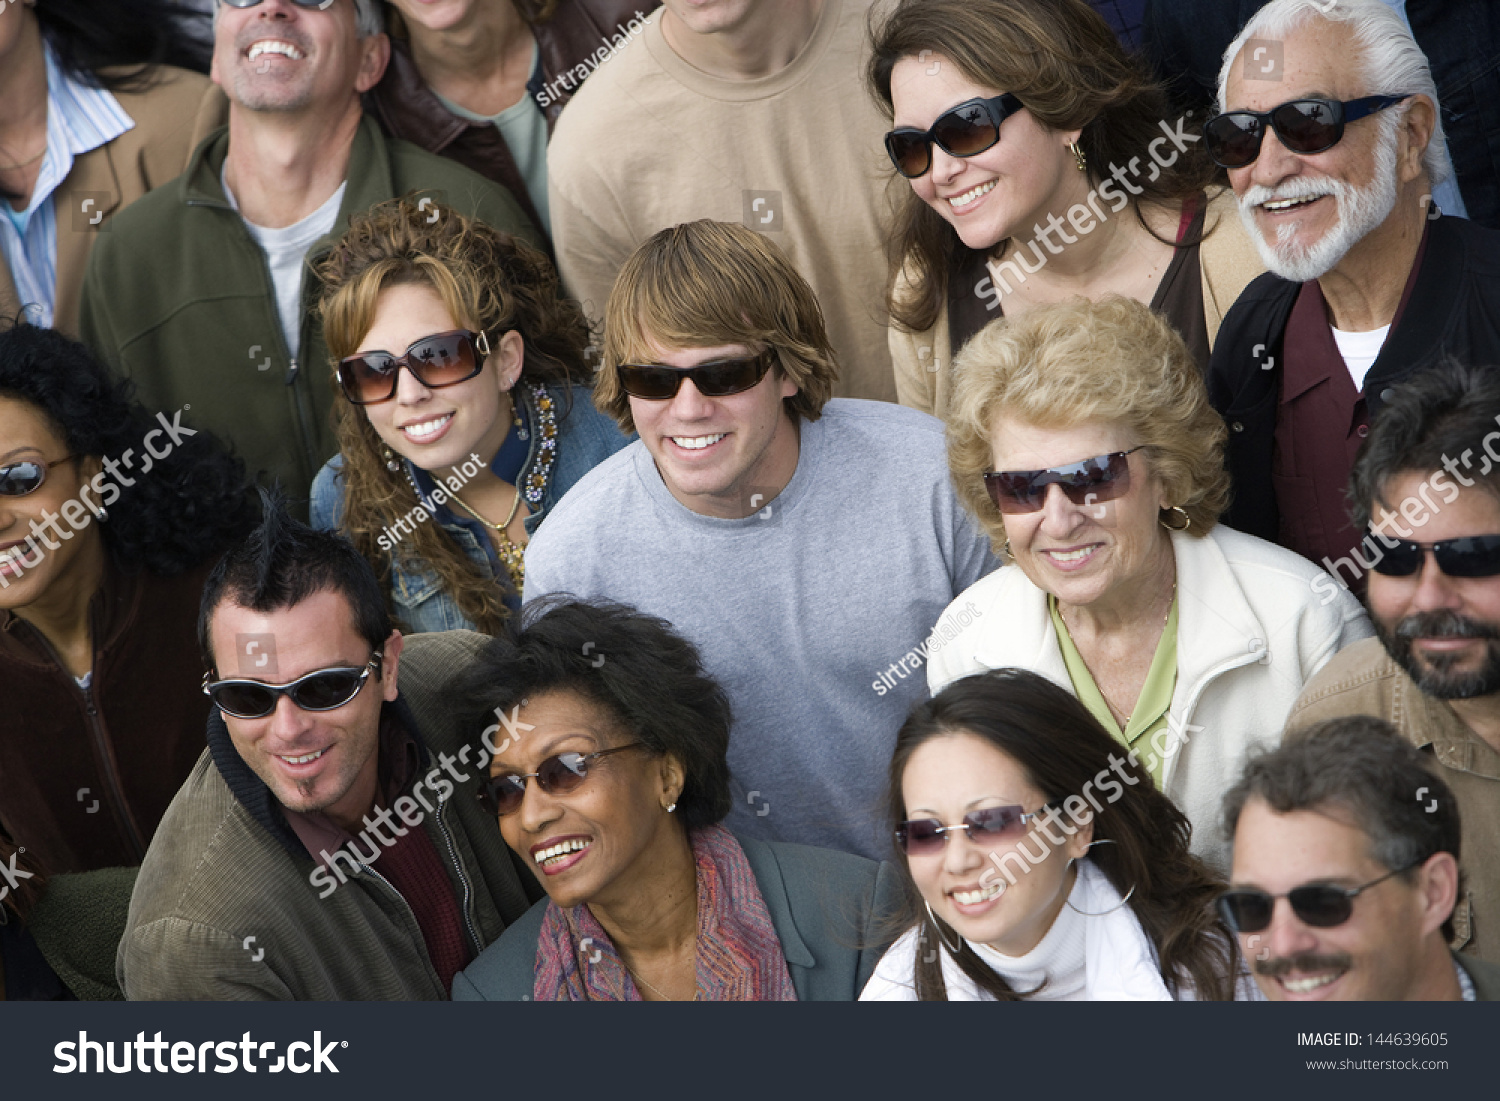 High angle view of happy group of multiethnic people wearing sunglasses #144639605